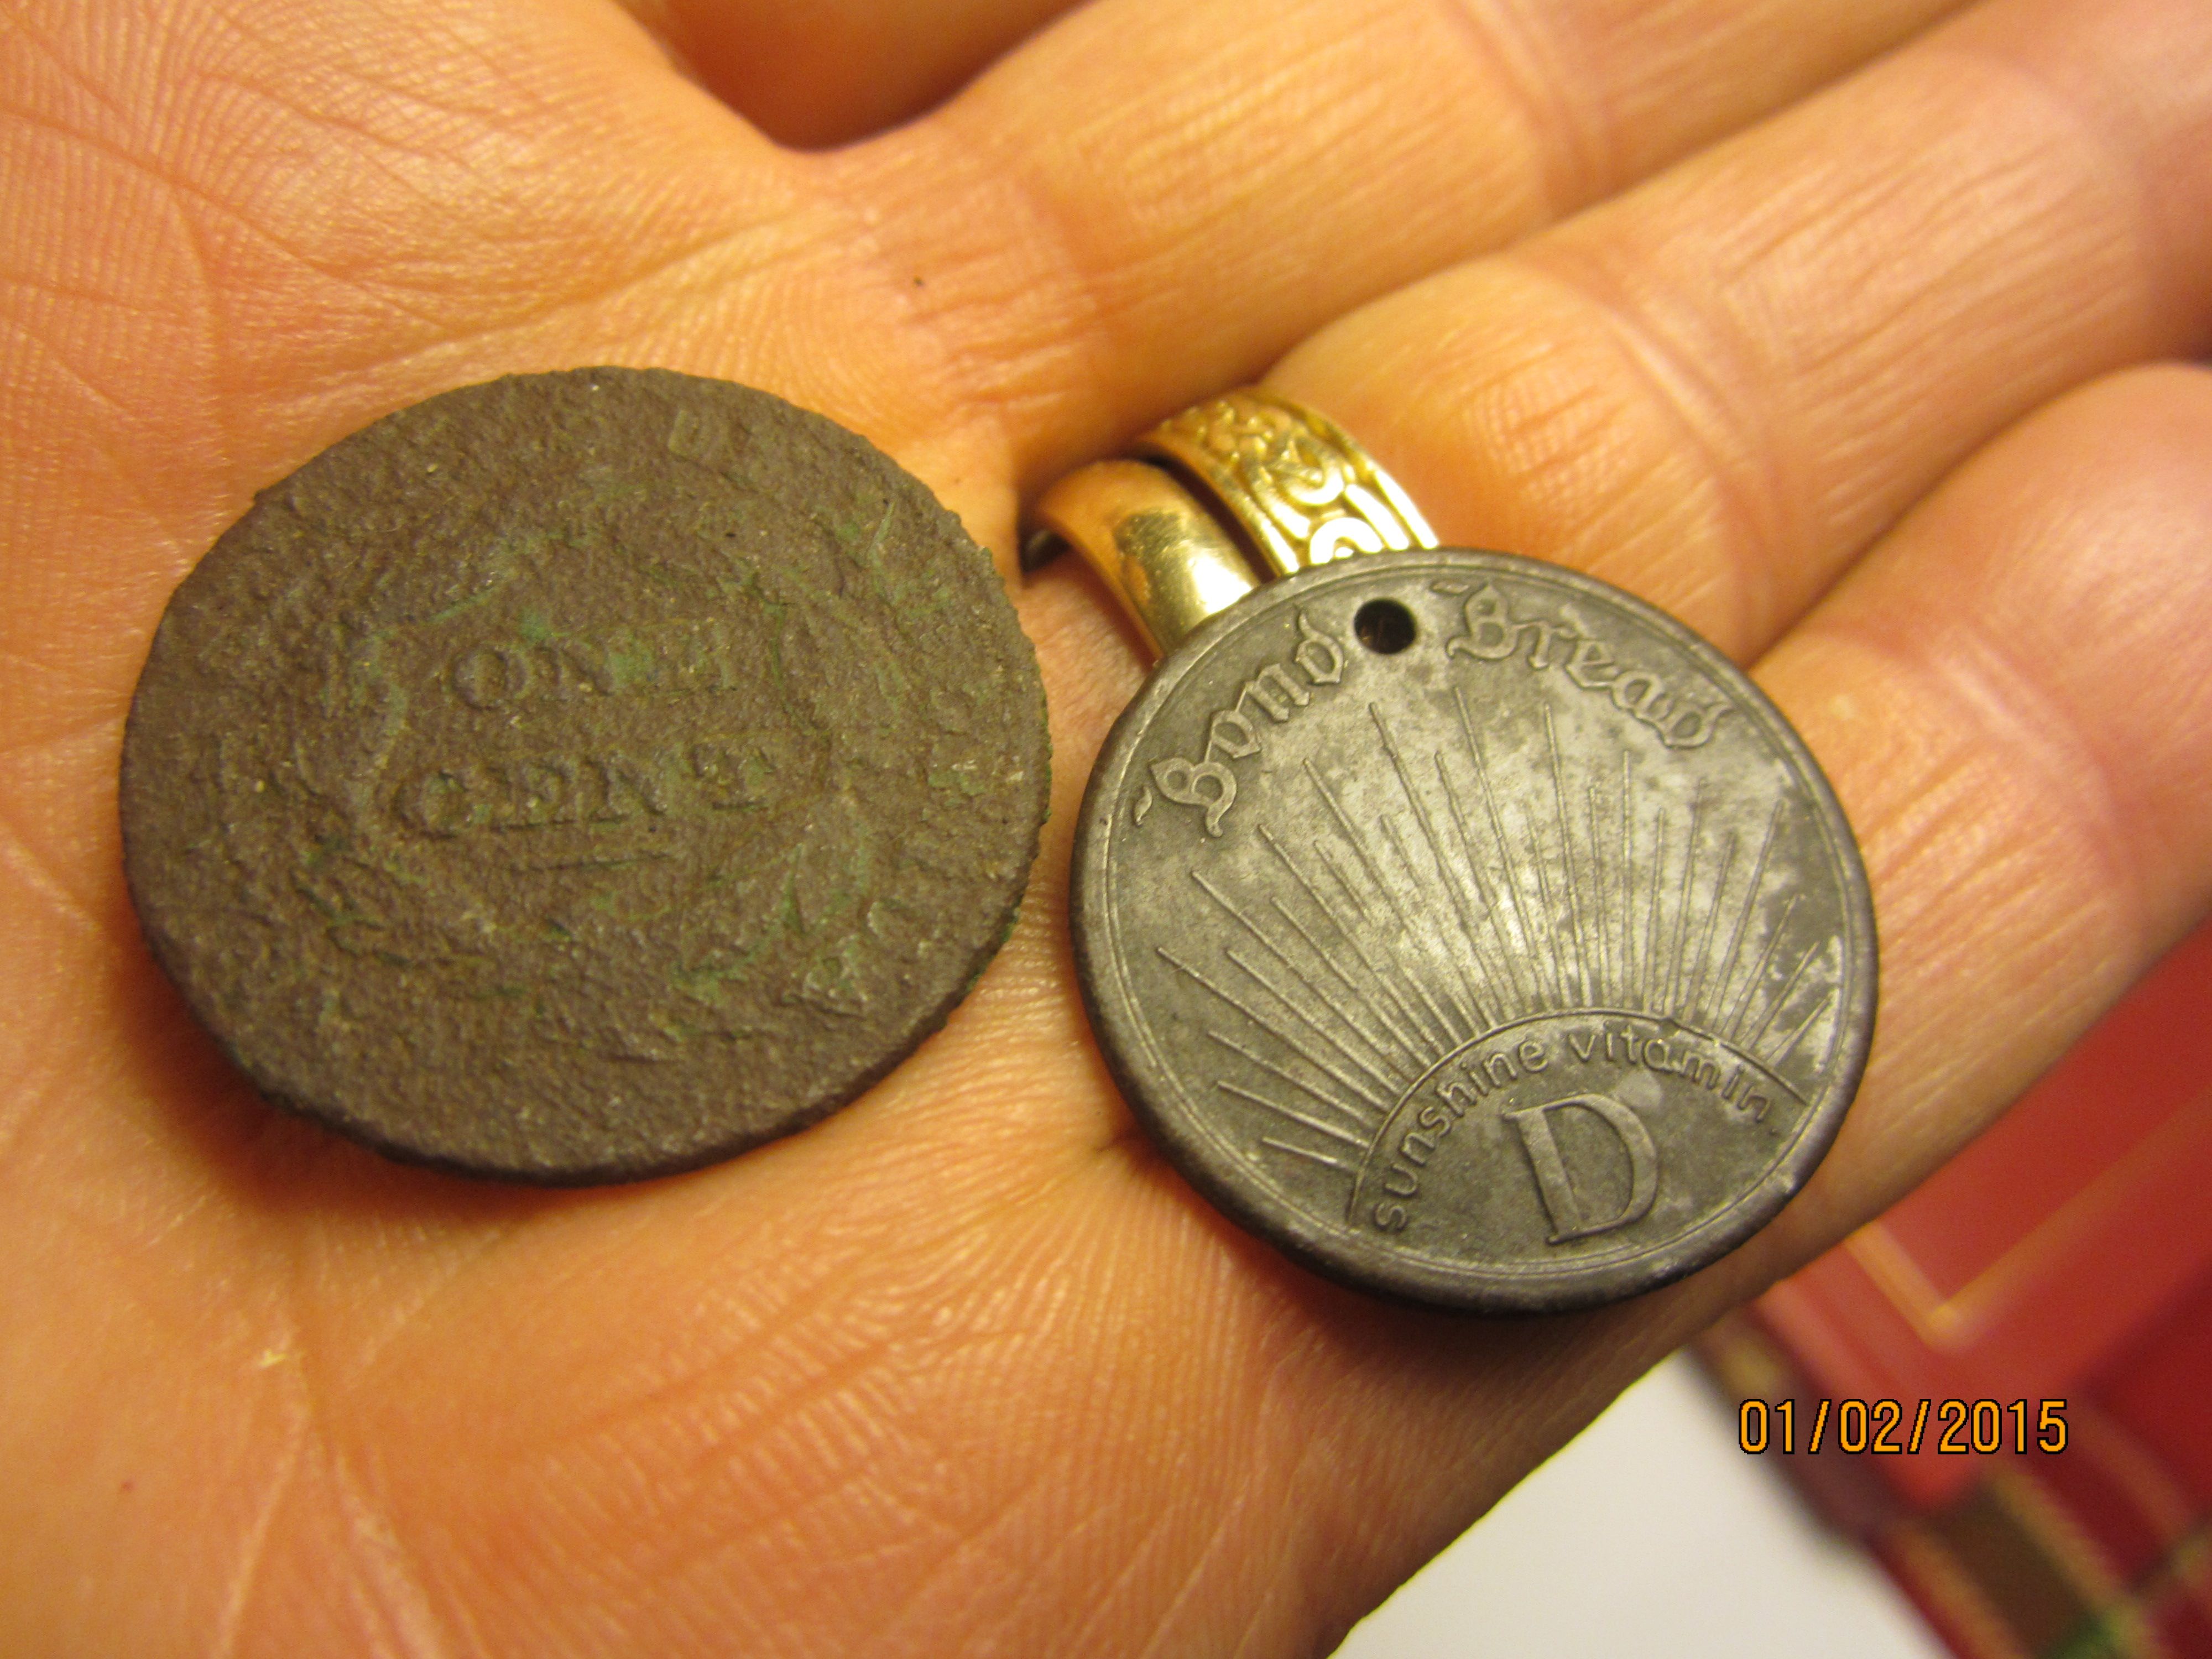 Large cent and Bond Bread token